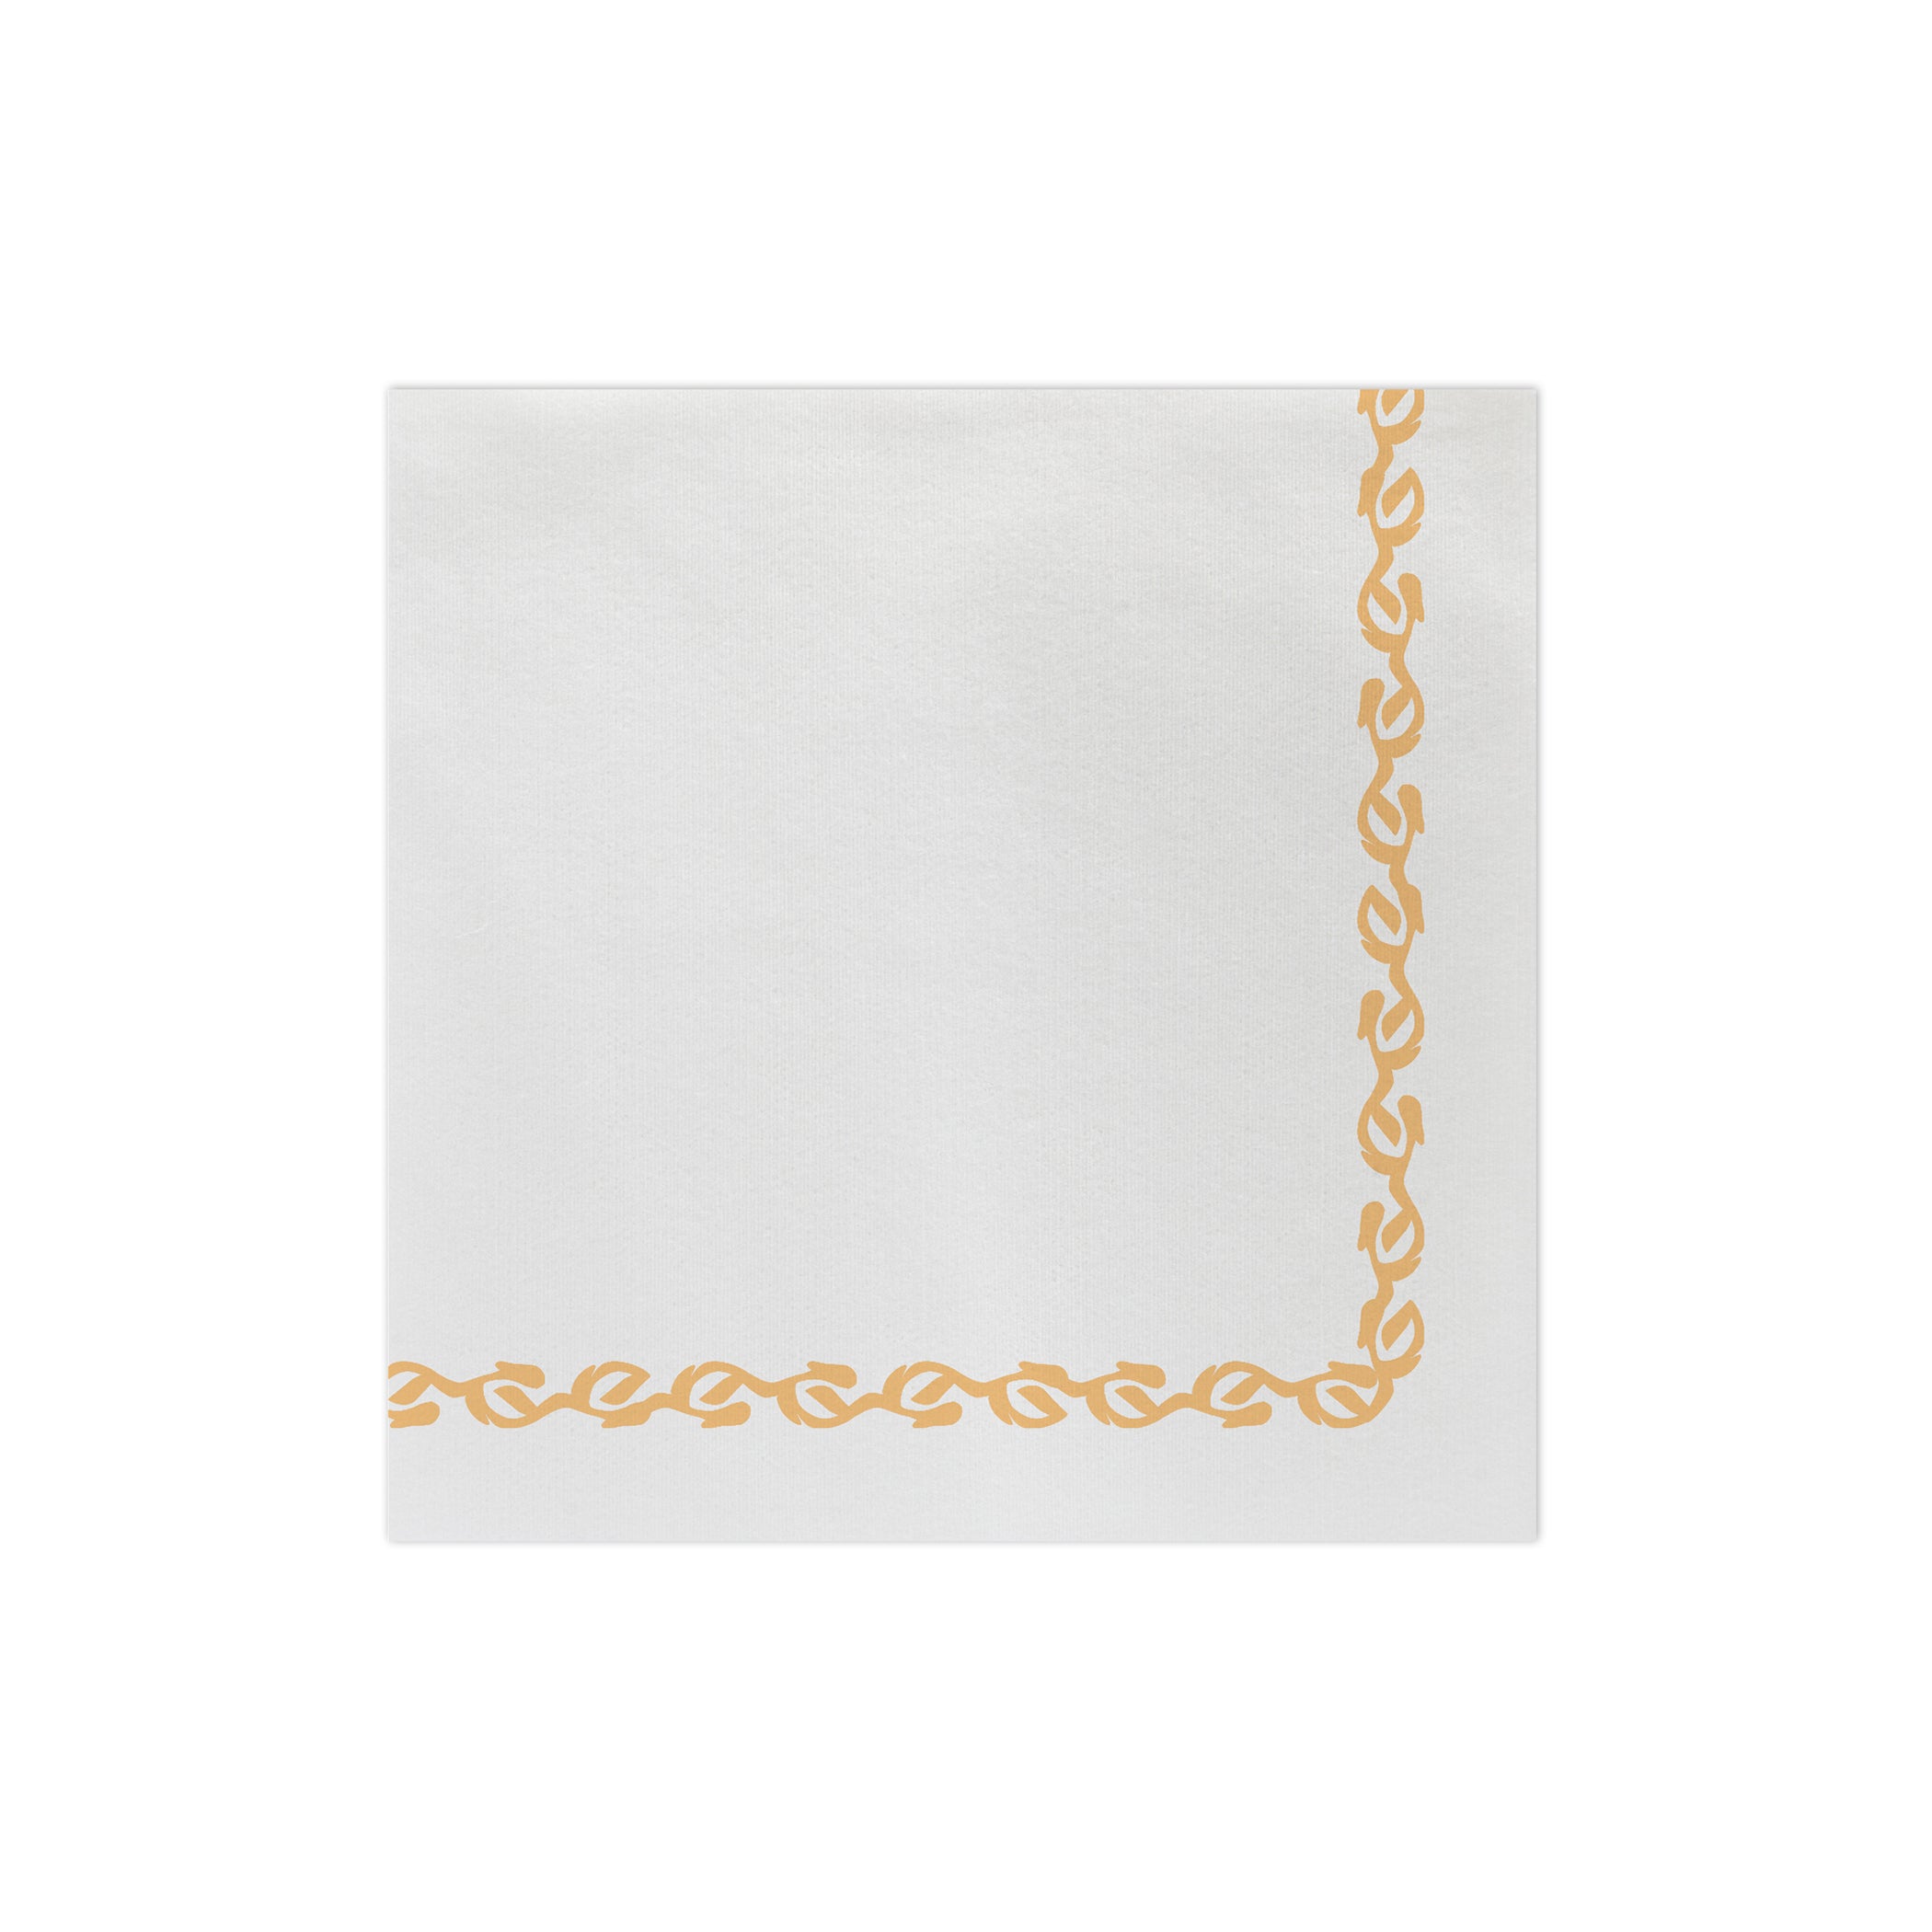 Papersoft Napkins Florentine Yellow Dinner Napkins (Pack of 20)